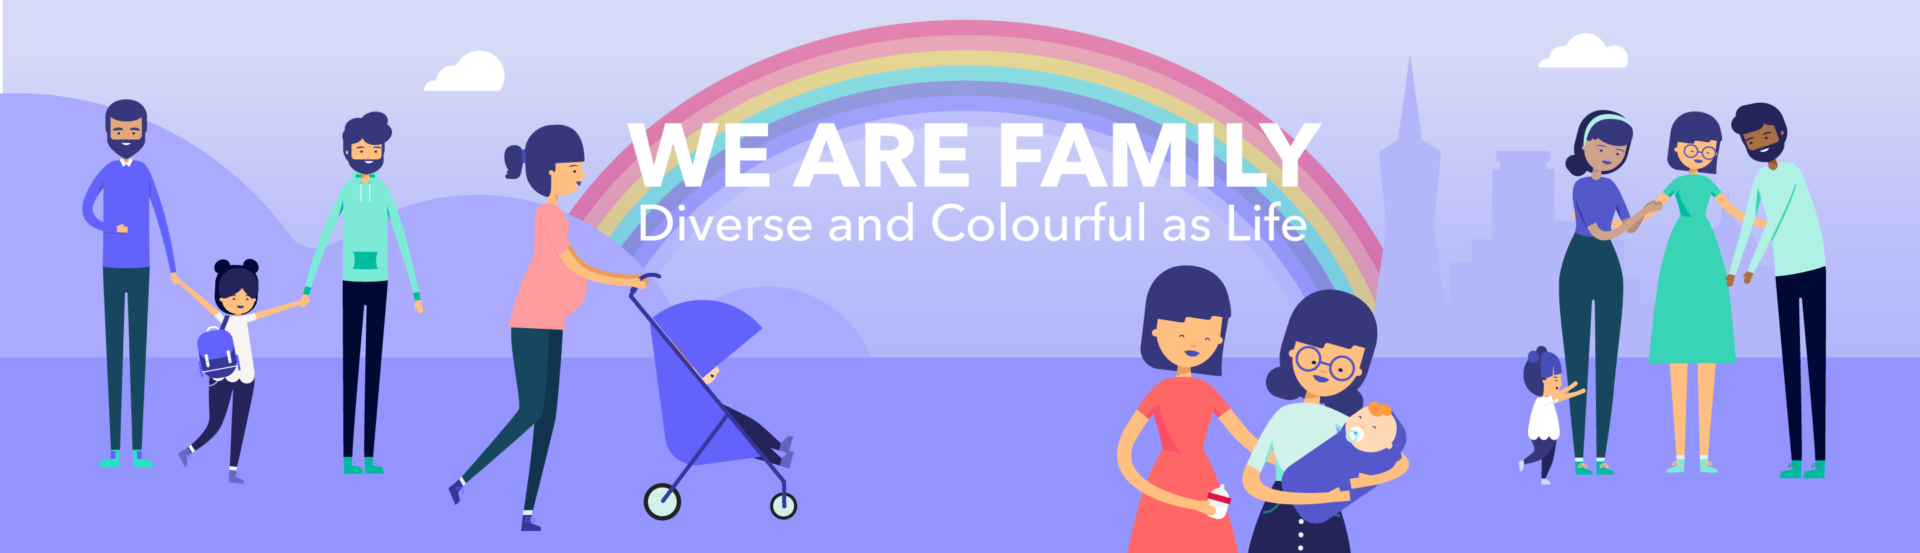 We Are Family: Diverse and Colourful as Life Itself